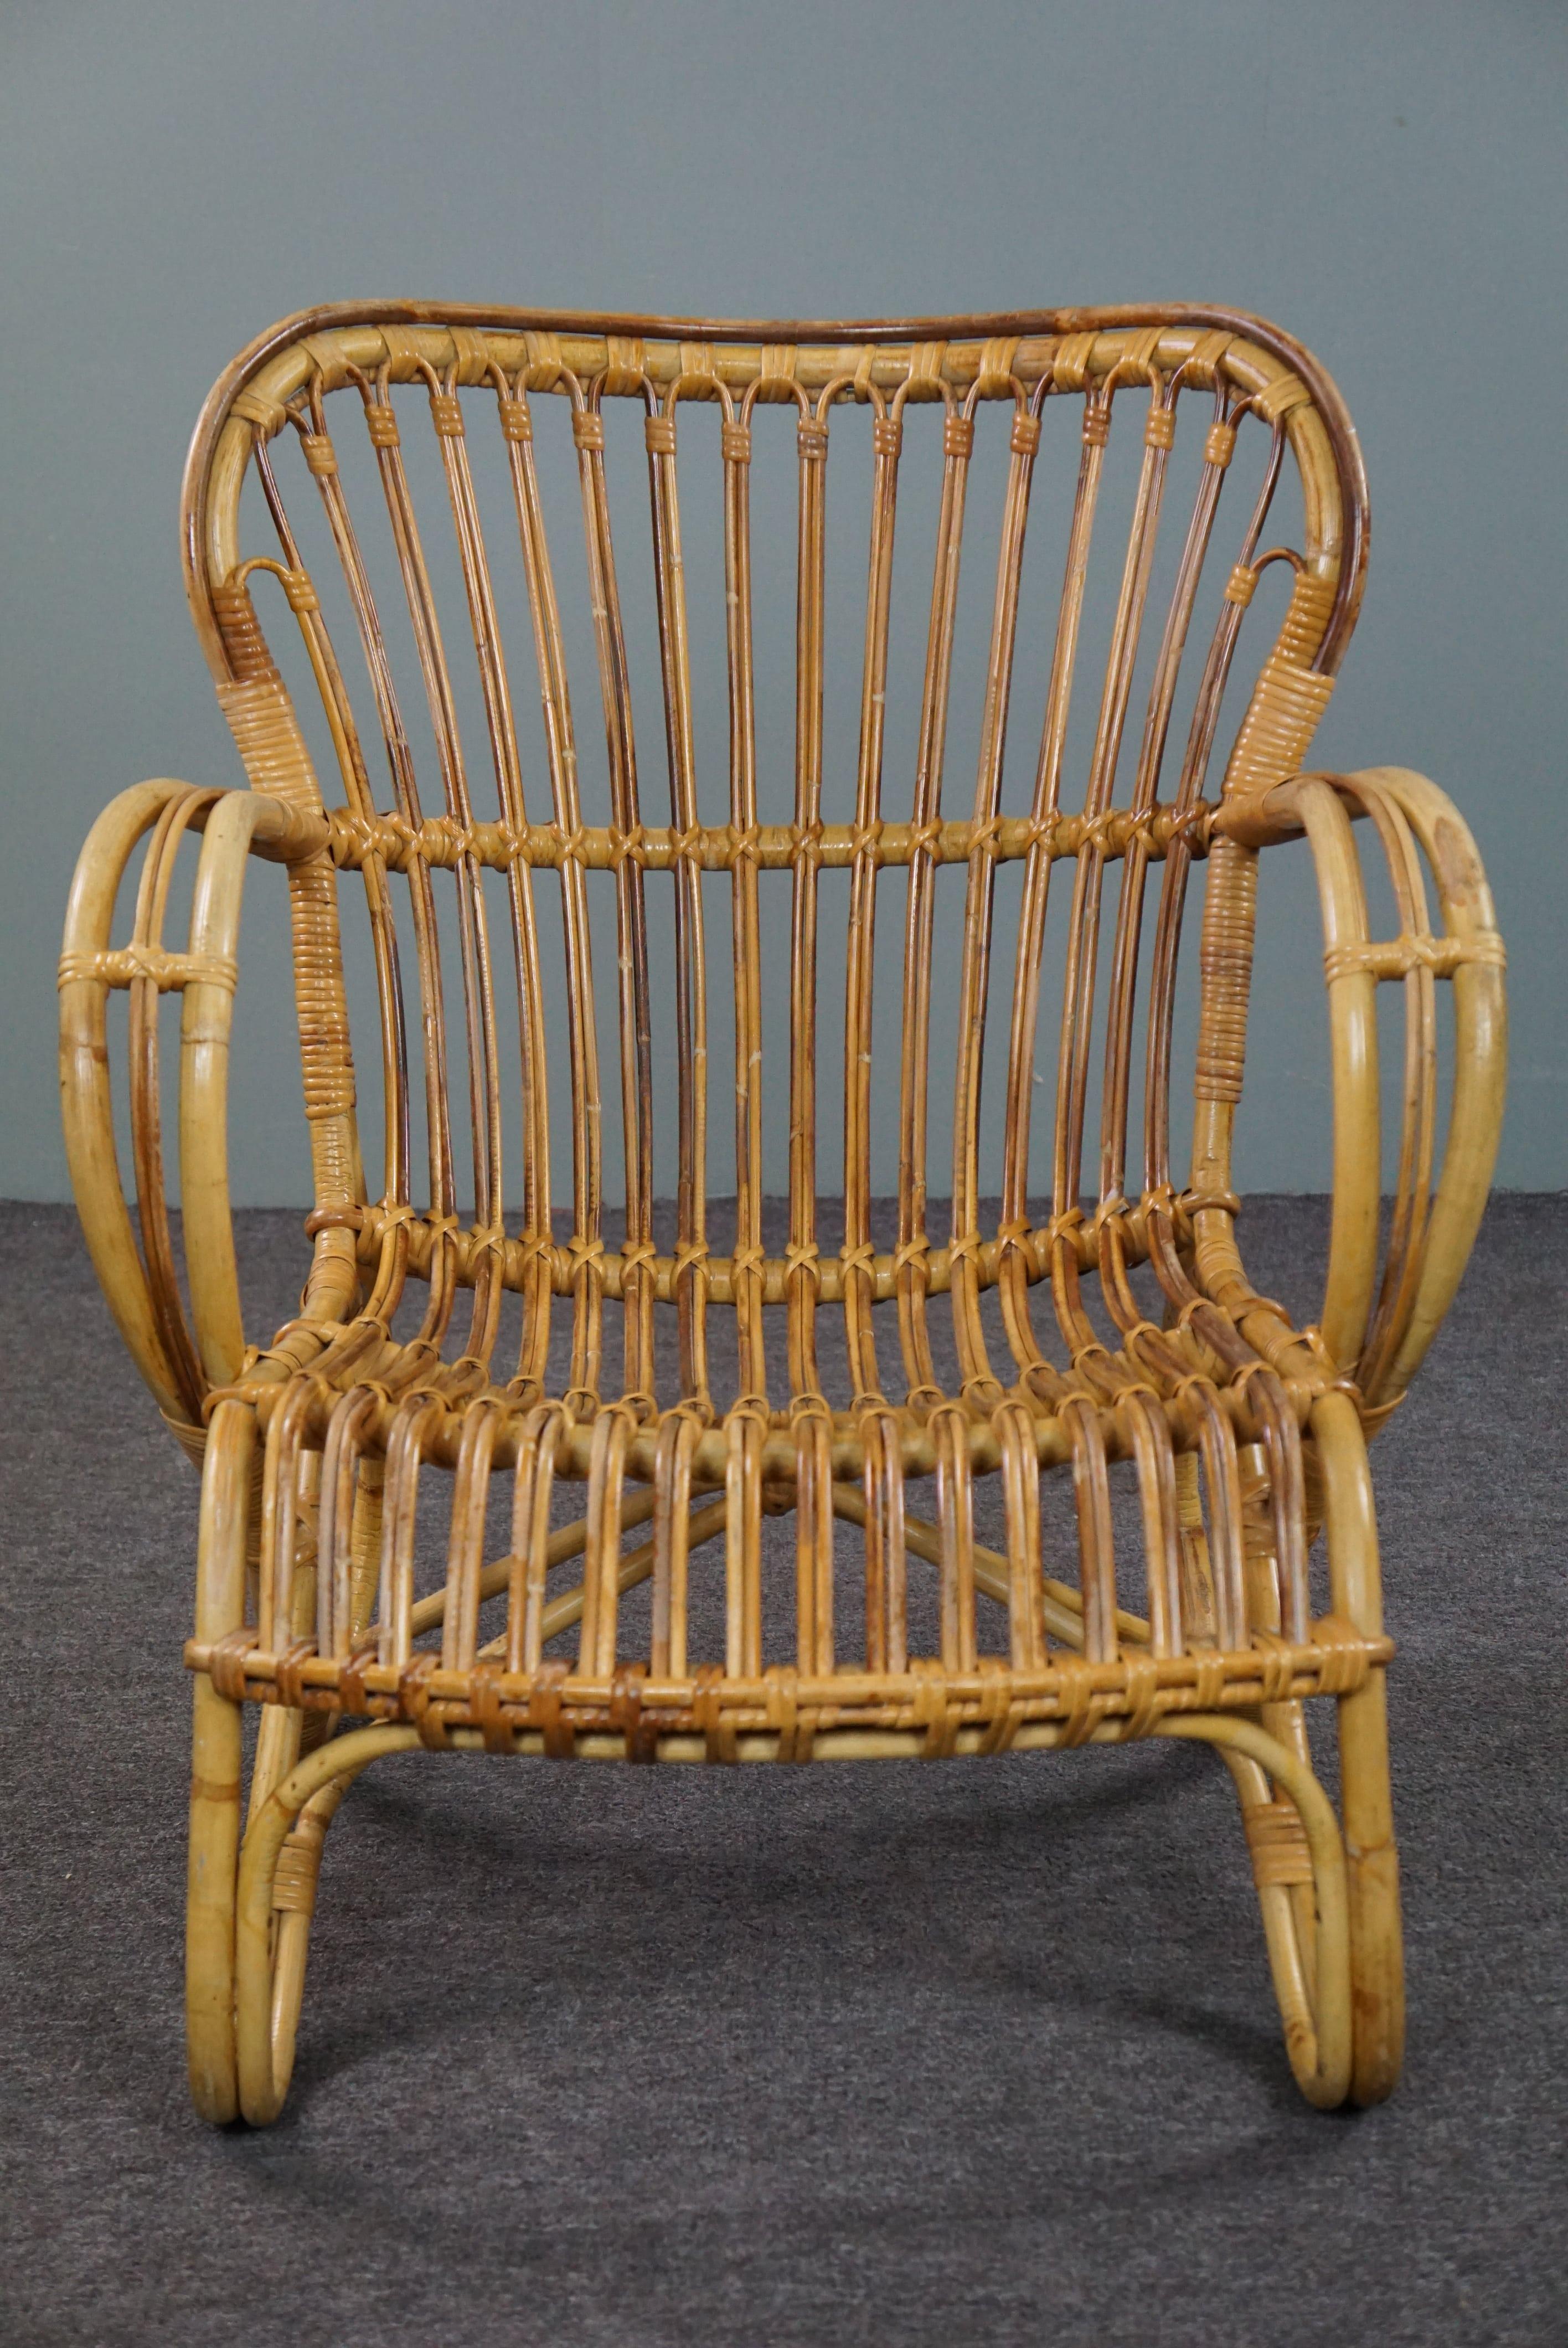 Offered is this unique and very beautifully designed Dutch Design armchair made in the 1950s in the Netherlands.

This rattan Belse 8 armchair, which is in very good condition, has a timeless design, a beautifully shaped and ergonomic back and